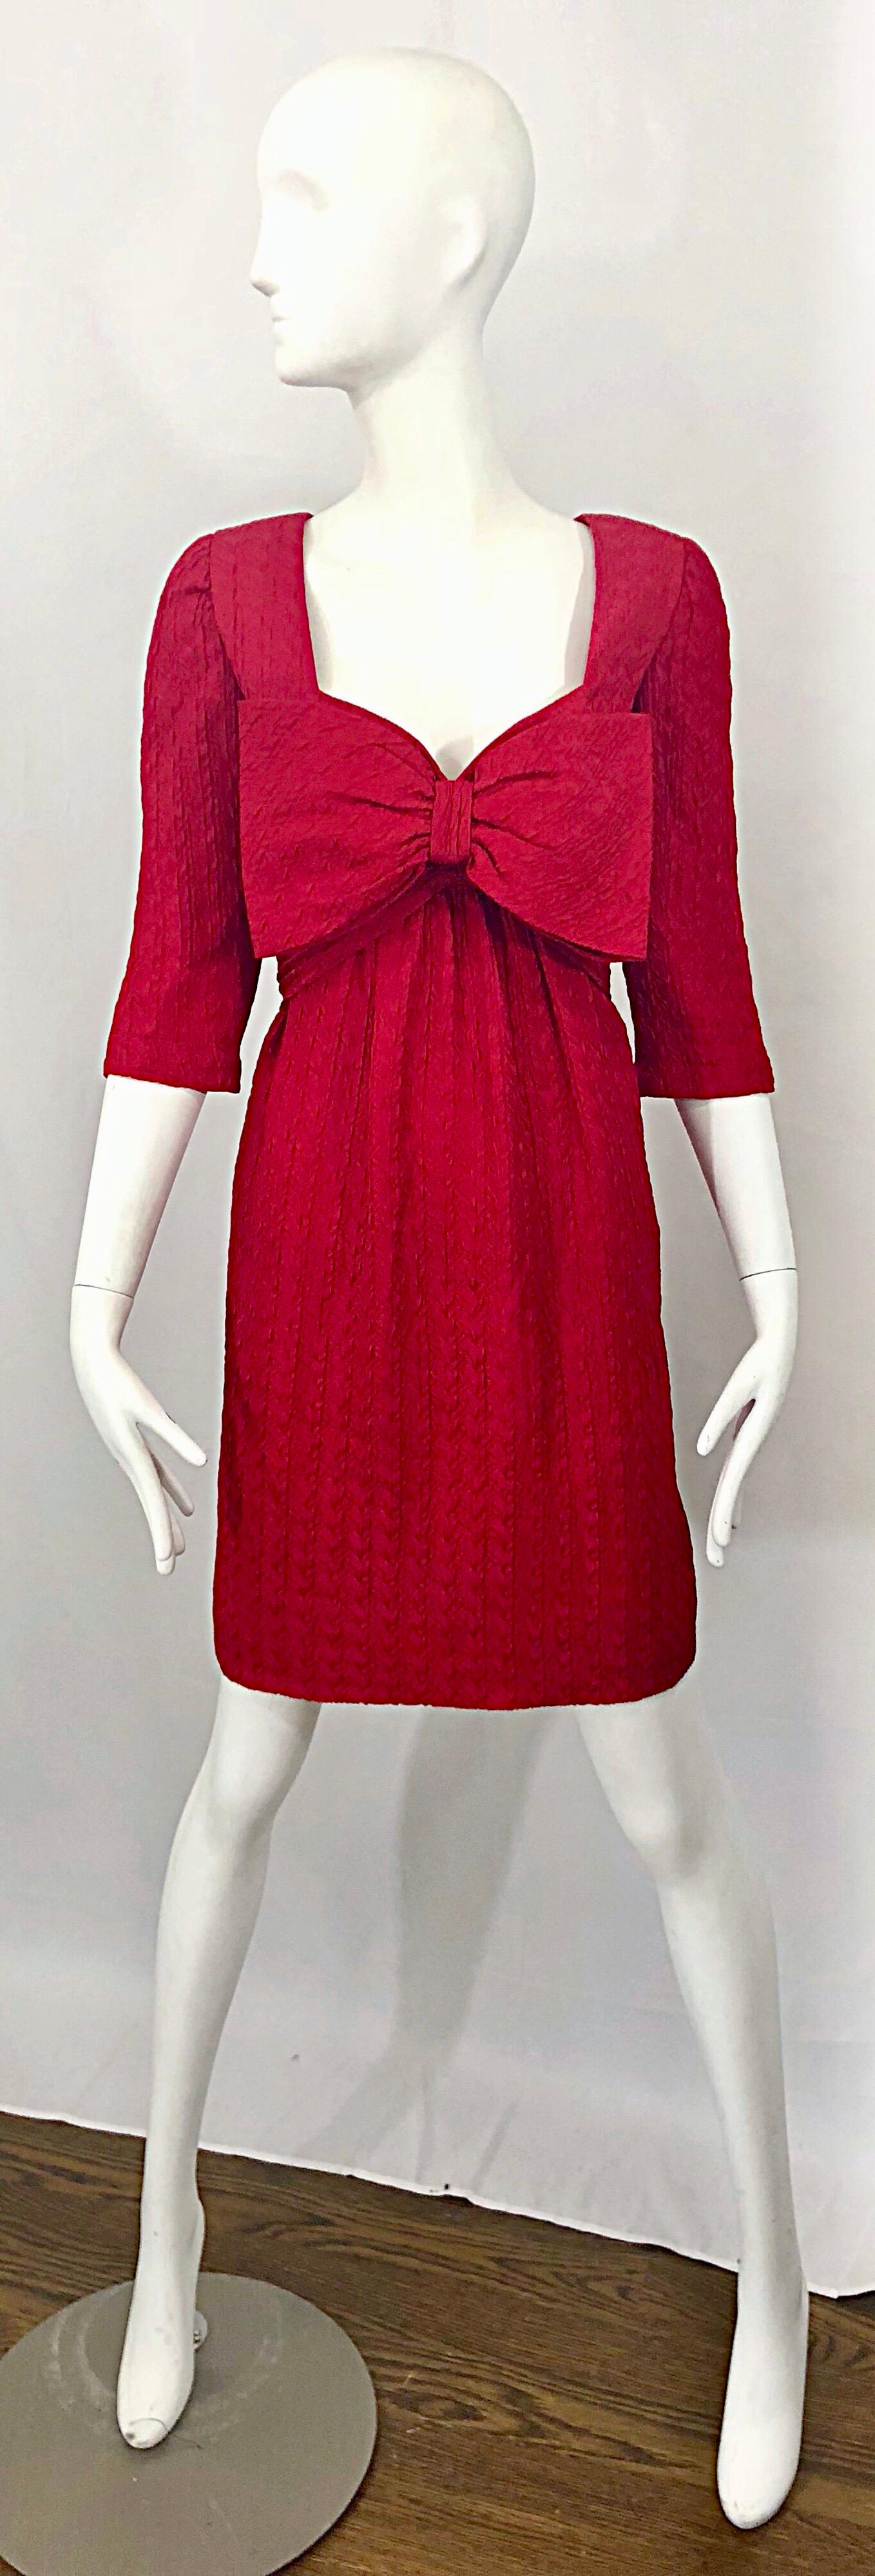 Gorgeous vintage late 1980s / 80s OSCAR DE LA RENTA lipstick red 3/4 sleeve silk bow dress! Features a sweetheart neckline, with an oversized Avant Garde red bow attached at the bust. Hidden zipper up the back with hook-and-eye closure. 3/4 sleeves